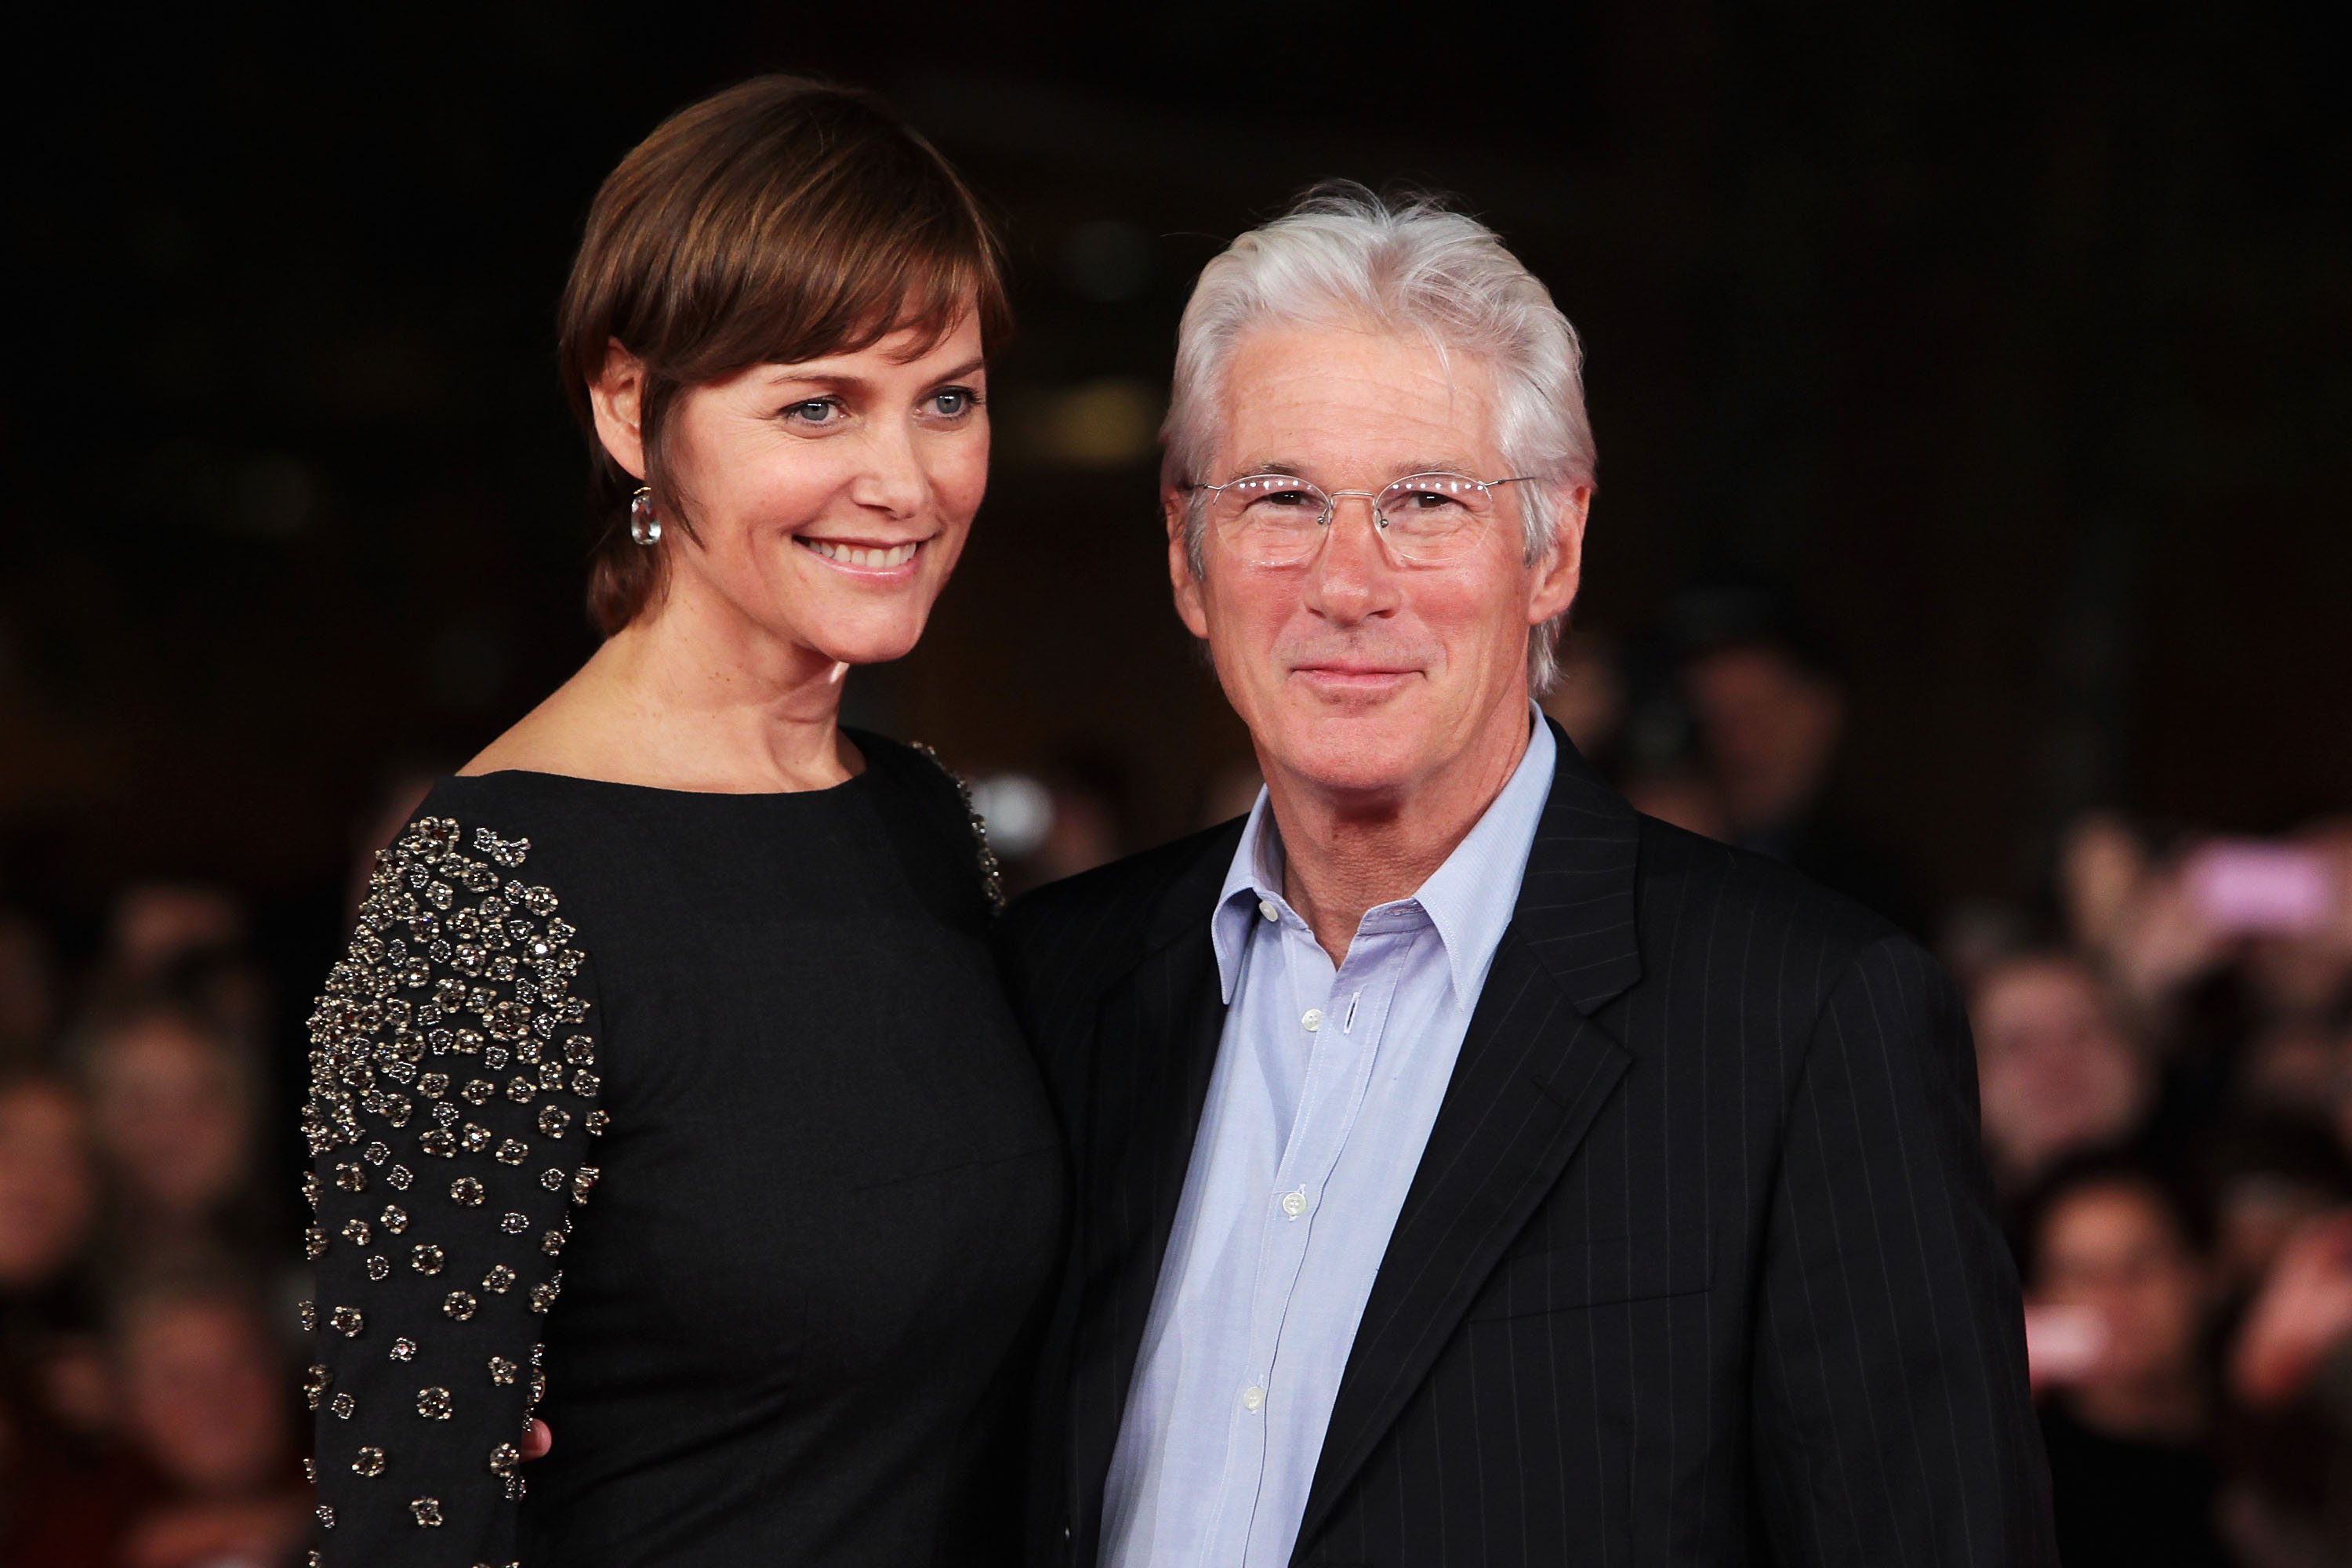 Carey Lowell and Richard Gere walk the red carpet during the 6th International Rome Film Festival on November 3, 2011, in Rome, Italy. | Source: Getty Images.